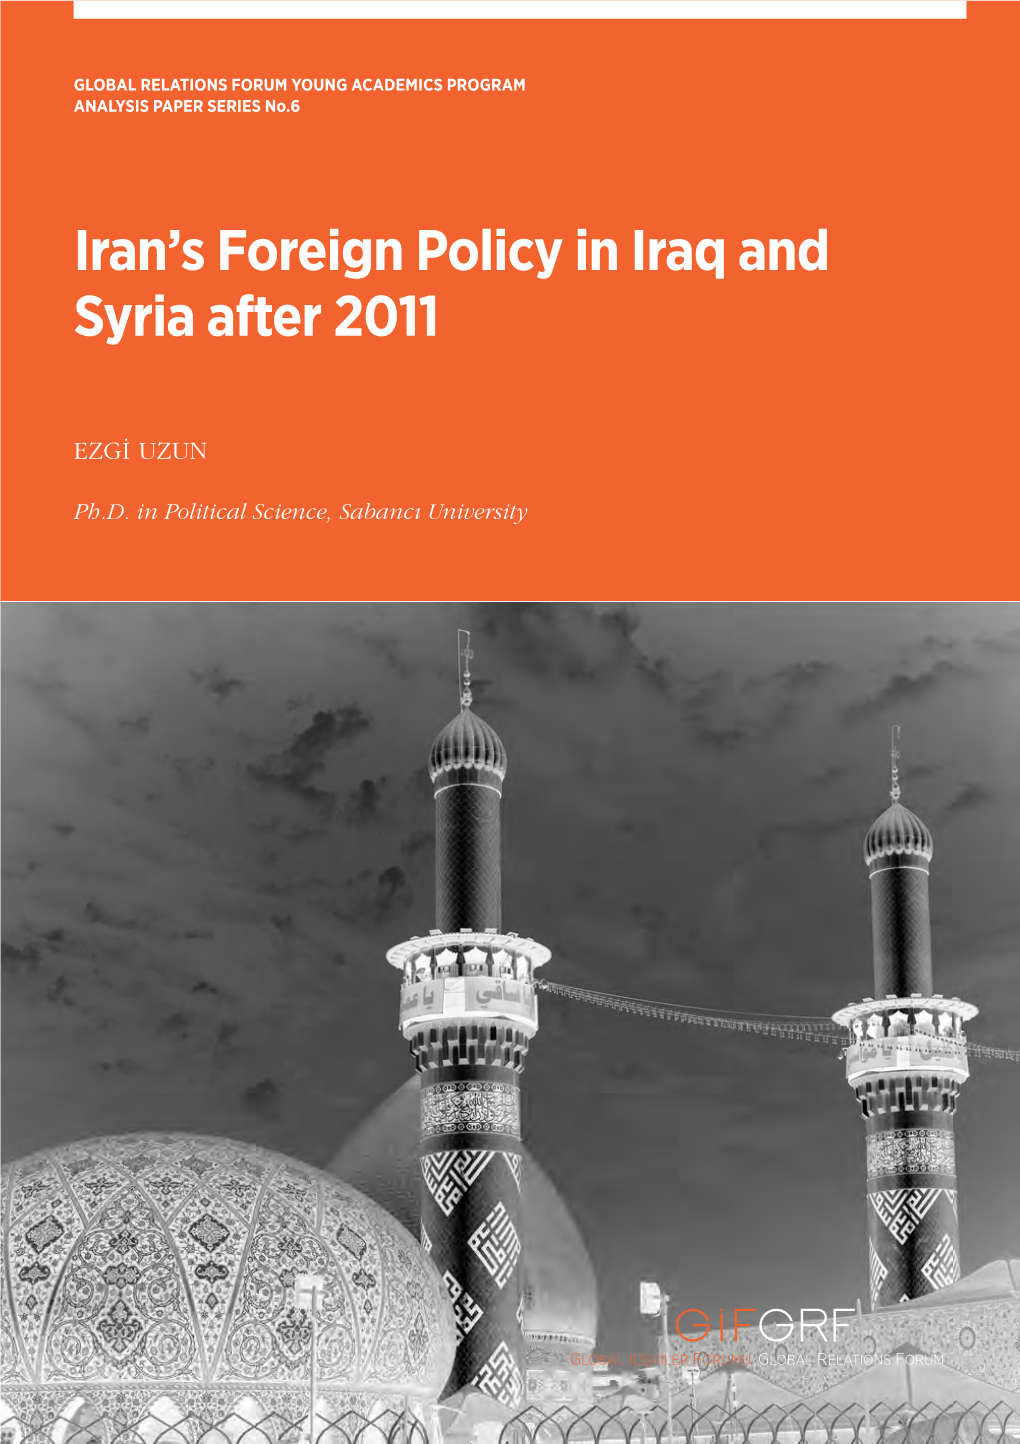 Iran's Foreign Policy in Iraq and Syria After 2011 by Ezgi Uzun, Ph.D